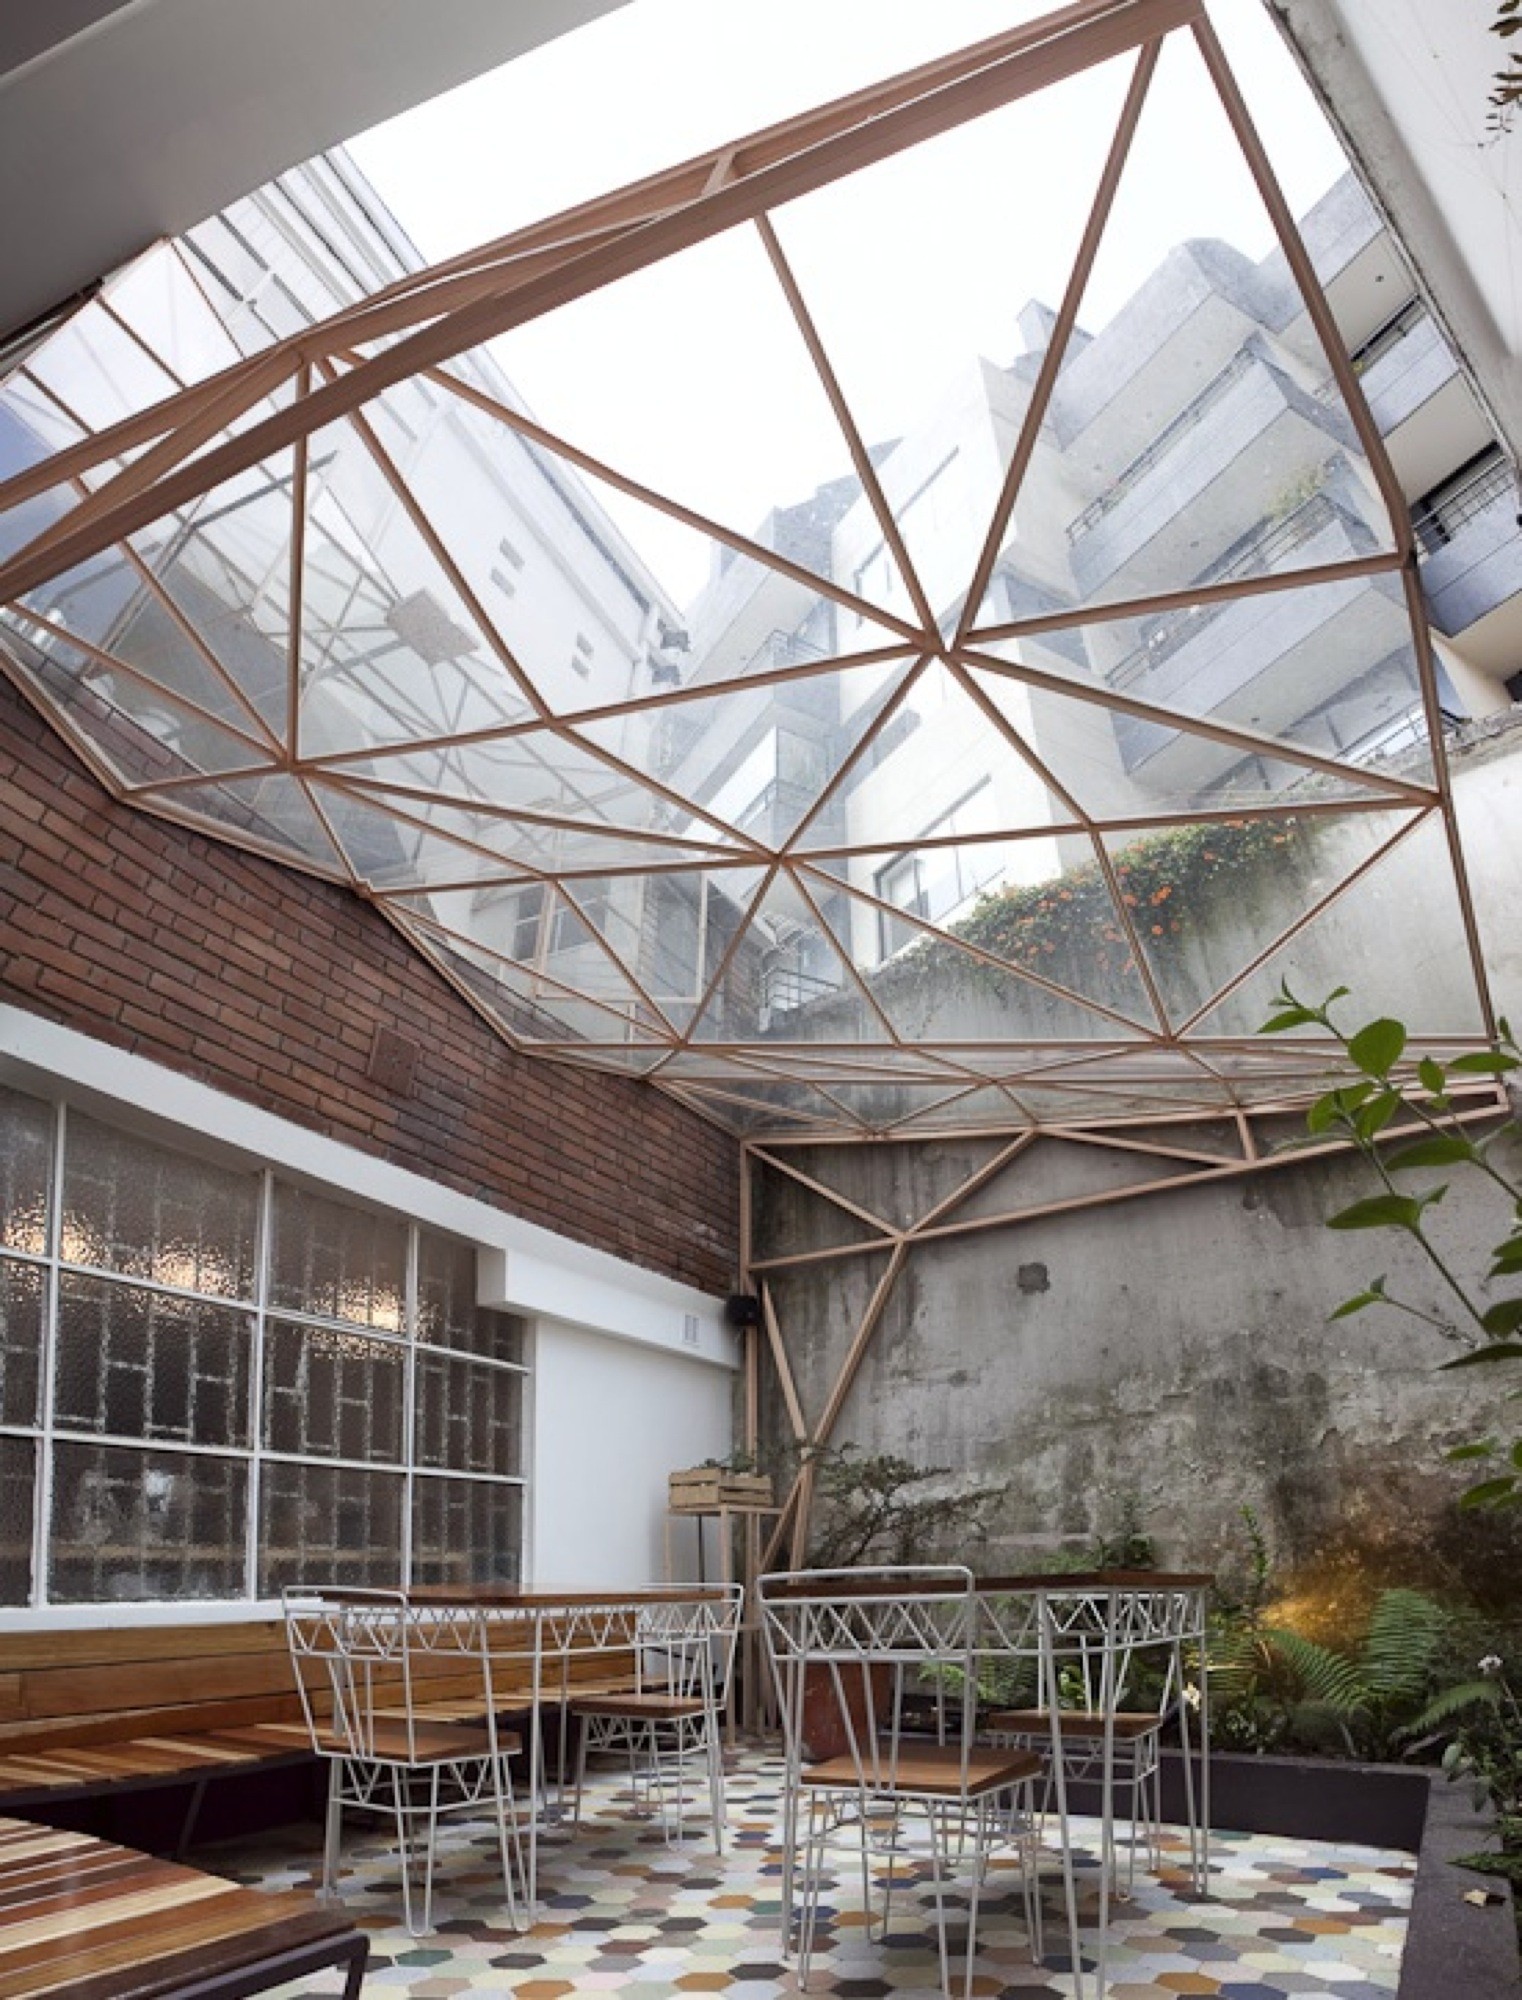 Amazing Glass Roofs That You Would Love To Have - Top Dreamer